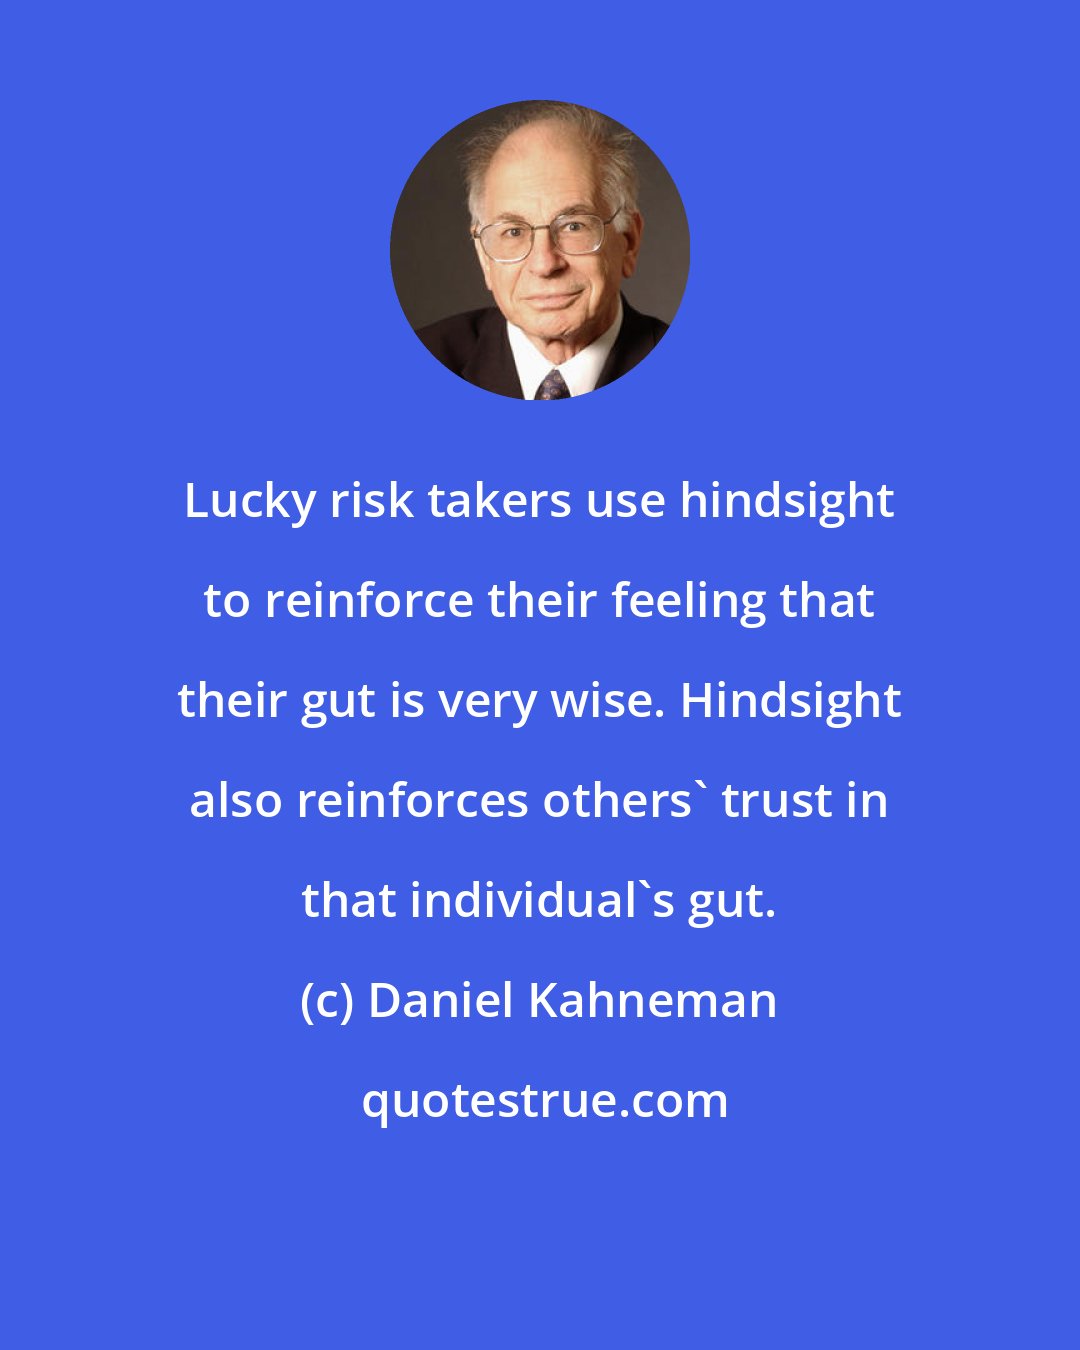 Daniel Kahneman: Lucky risk takers use hindsight to reinforce their feeling that their gut is very wise. Hindsight also reinforces others' trust in that individual's gut.